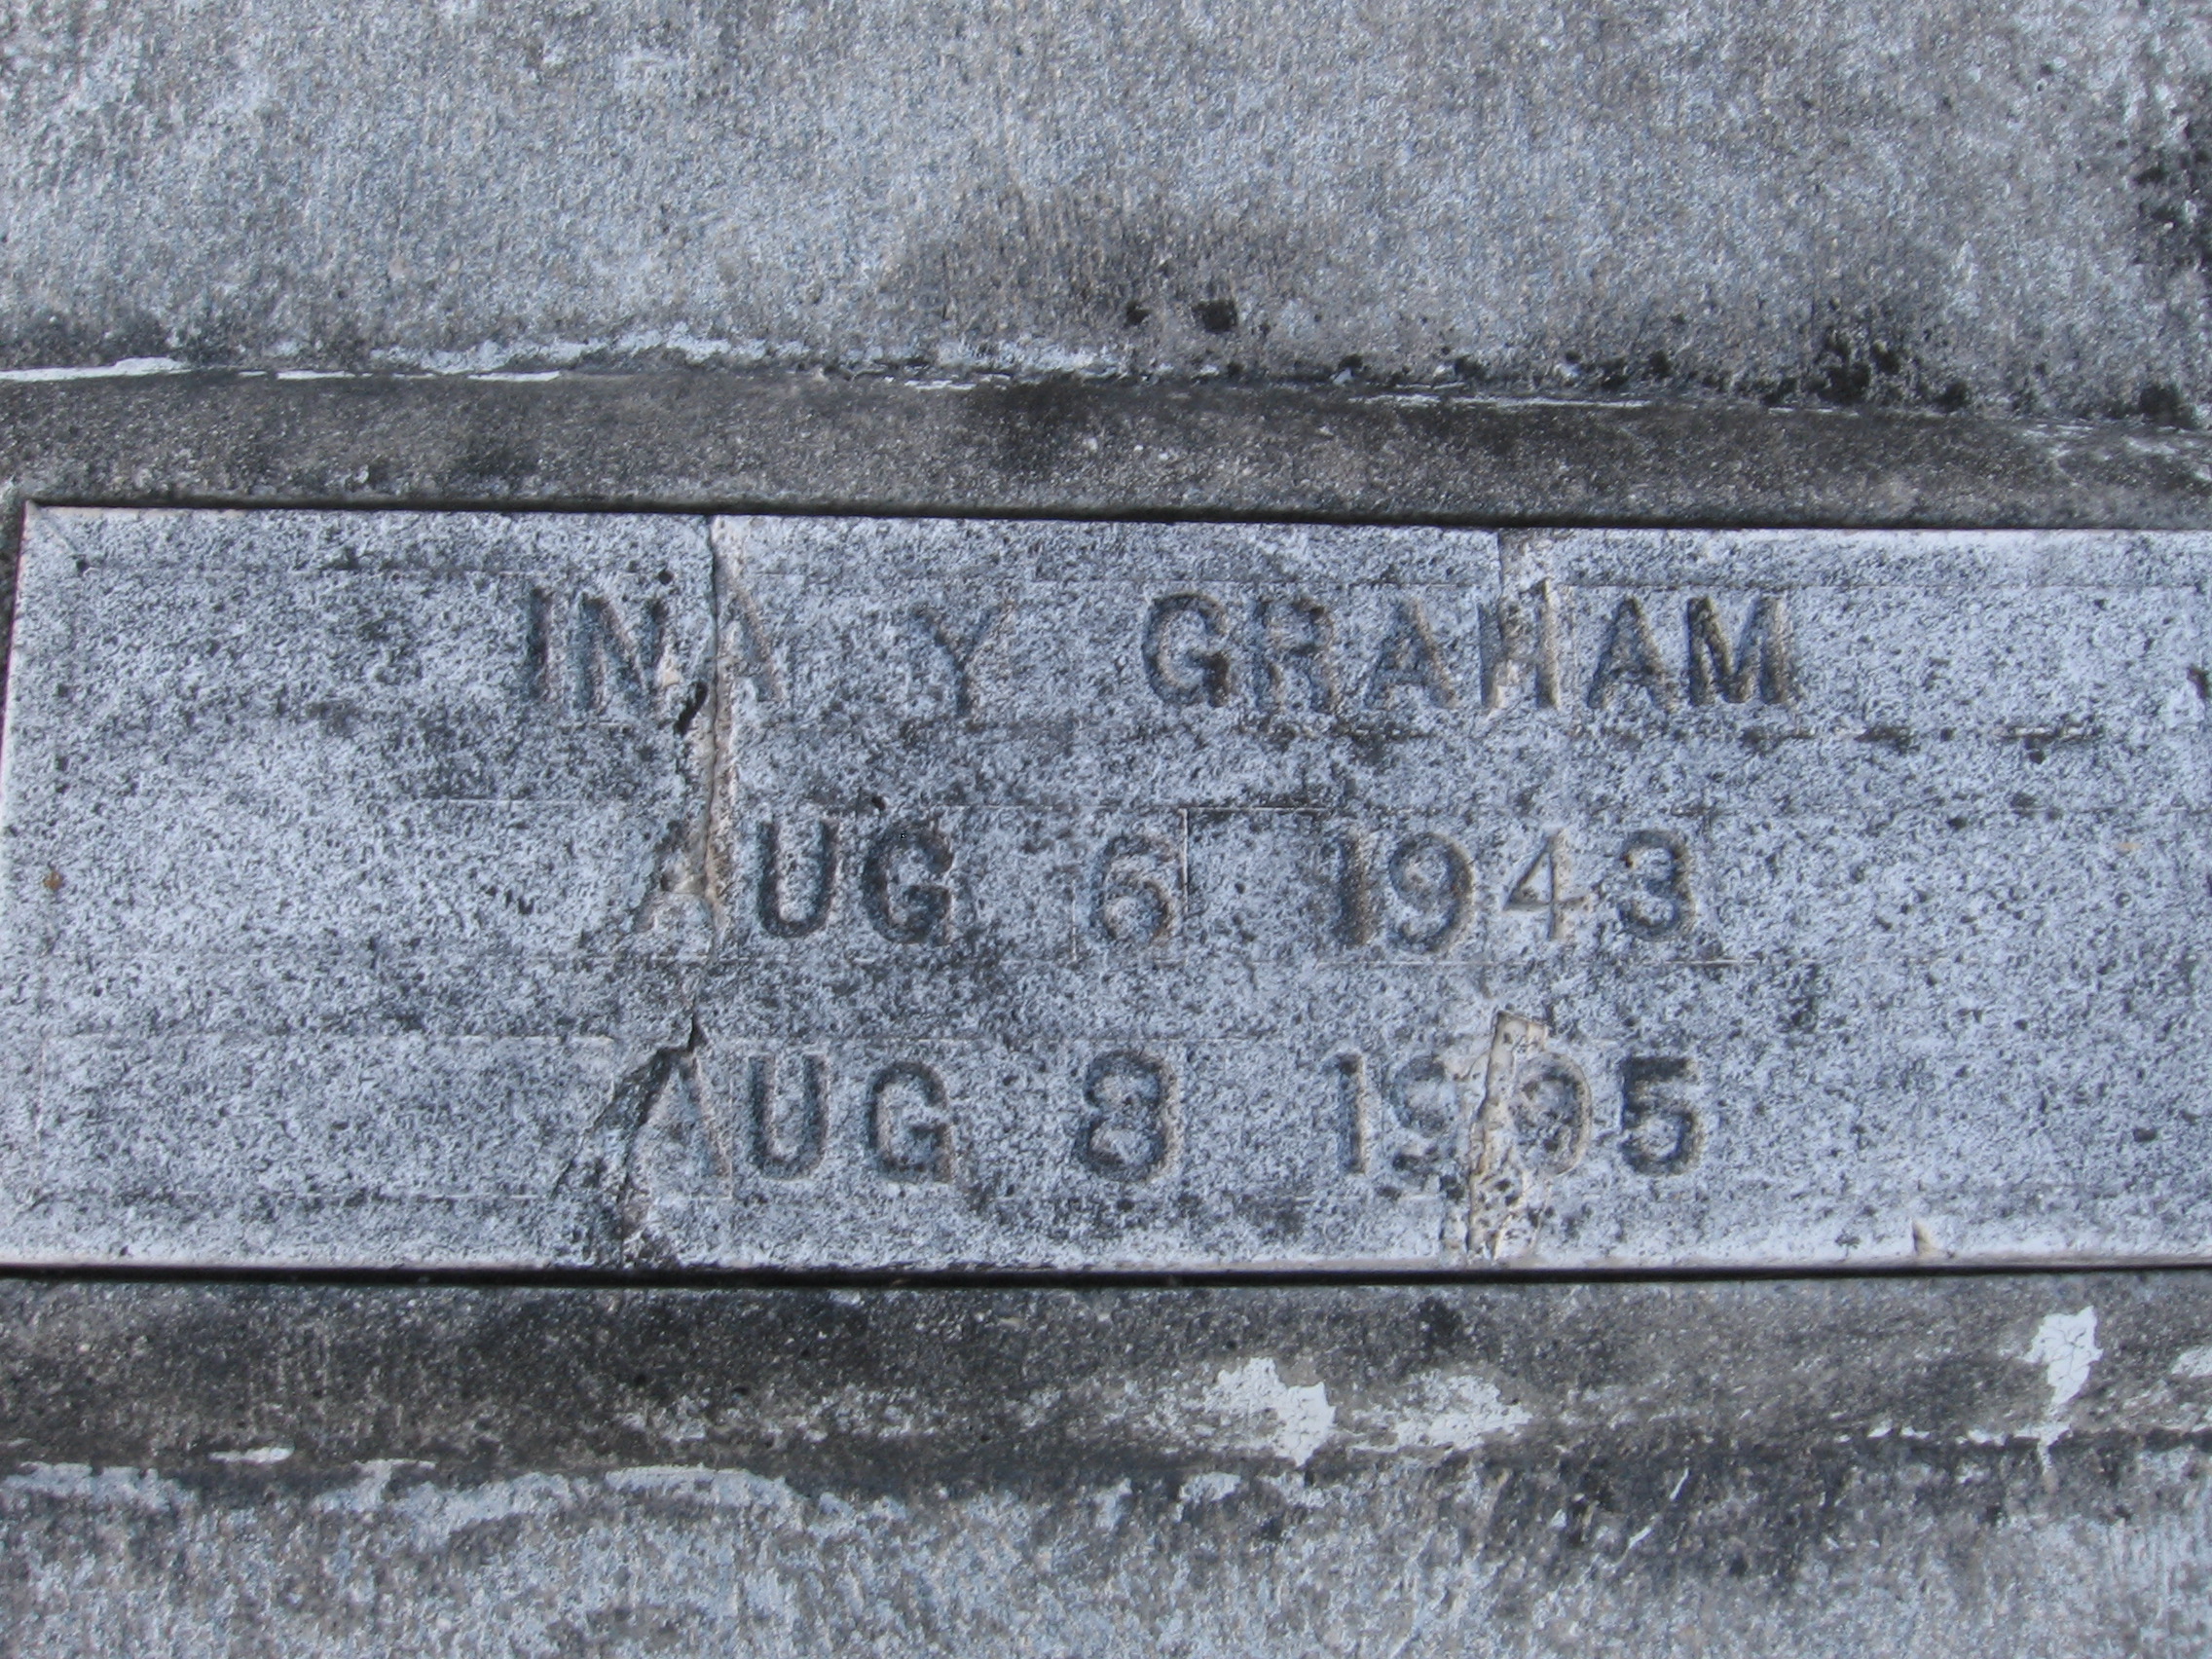 Ina Youngblood Graham